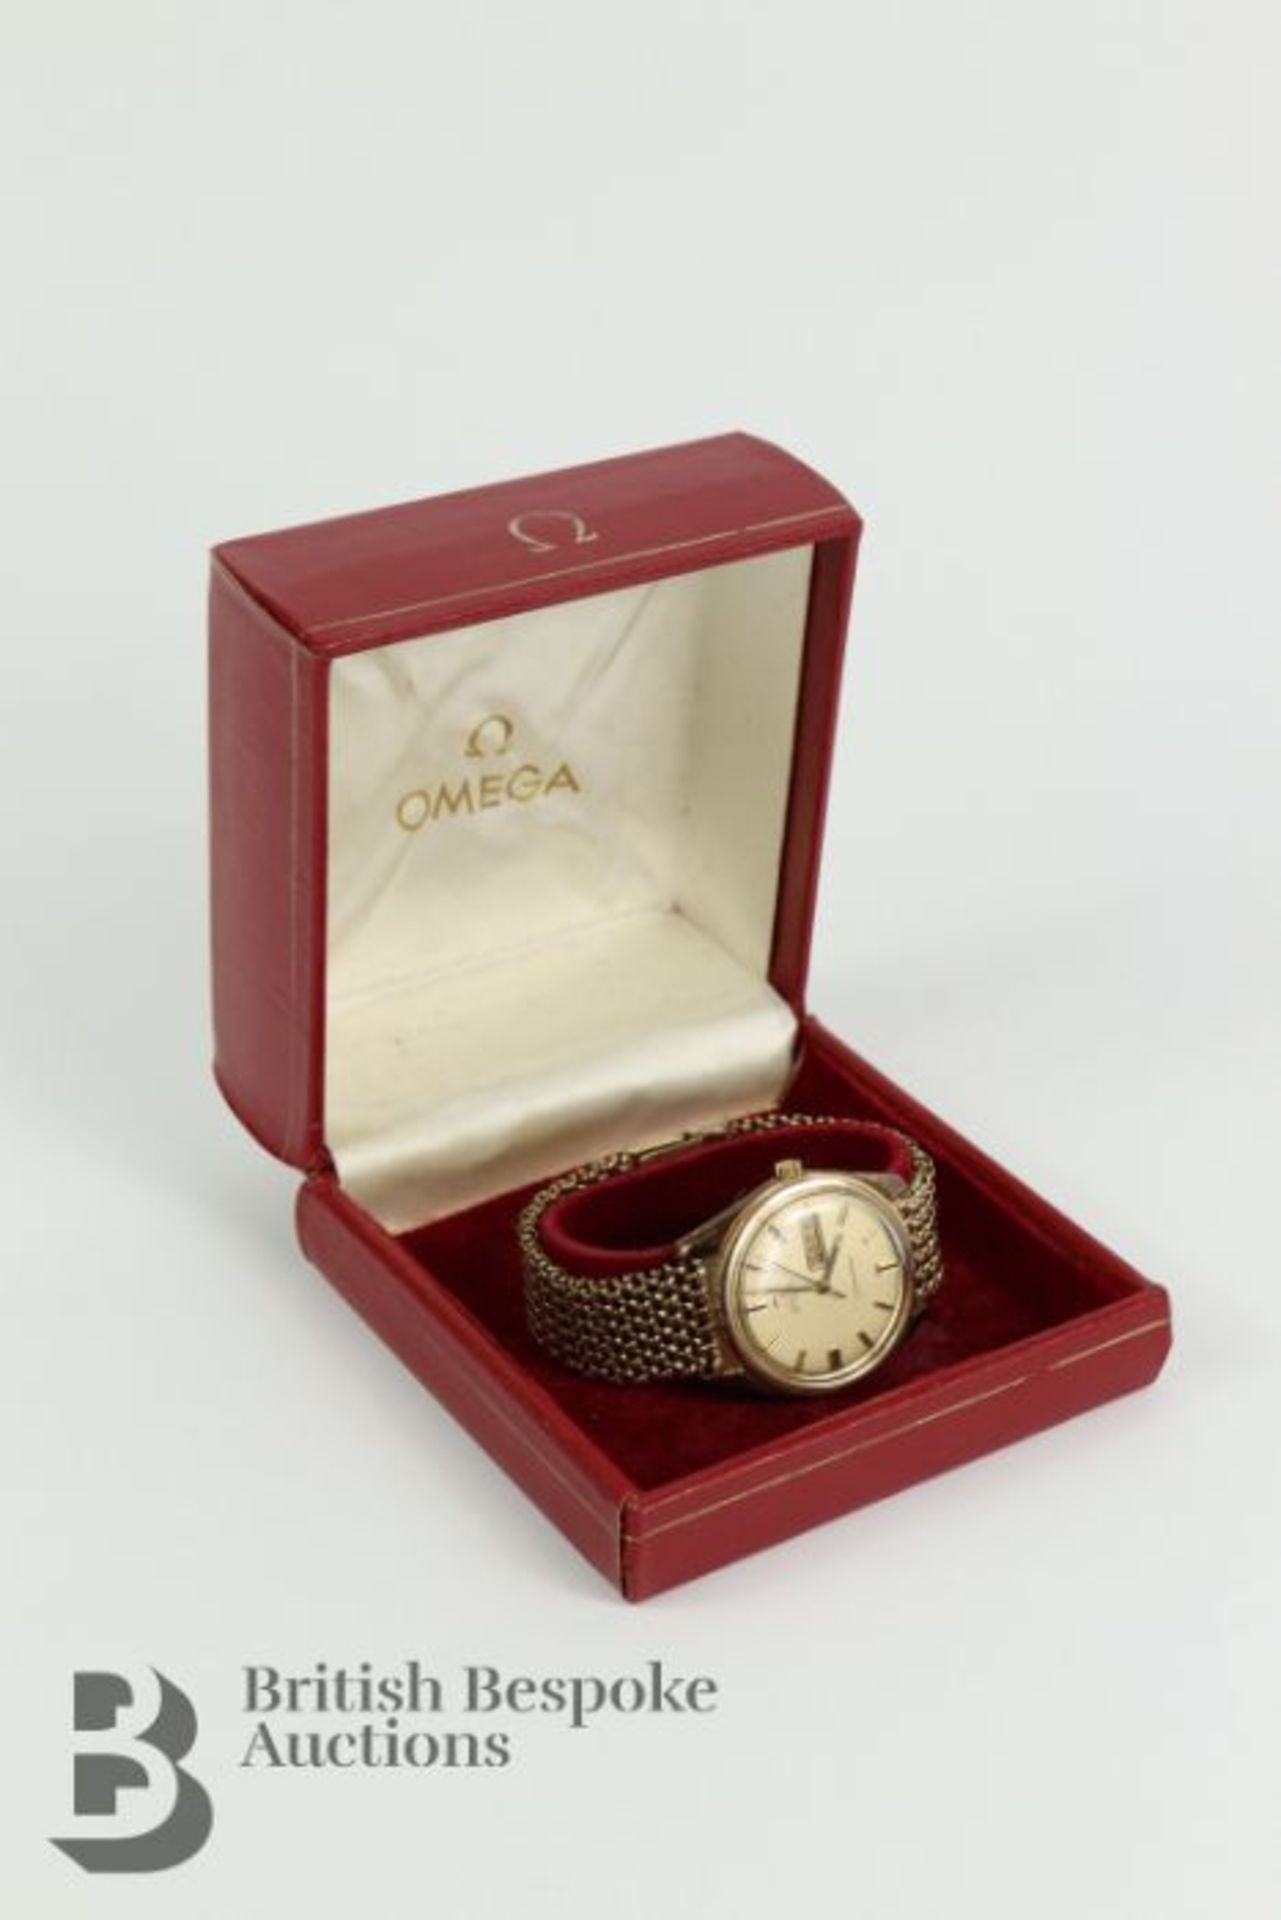 Gentleman's 9ct Gold Omega Seamaster Day Date Wrist Watch - Image 3 of 11